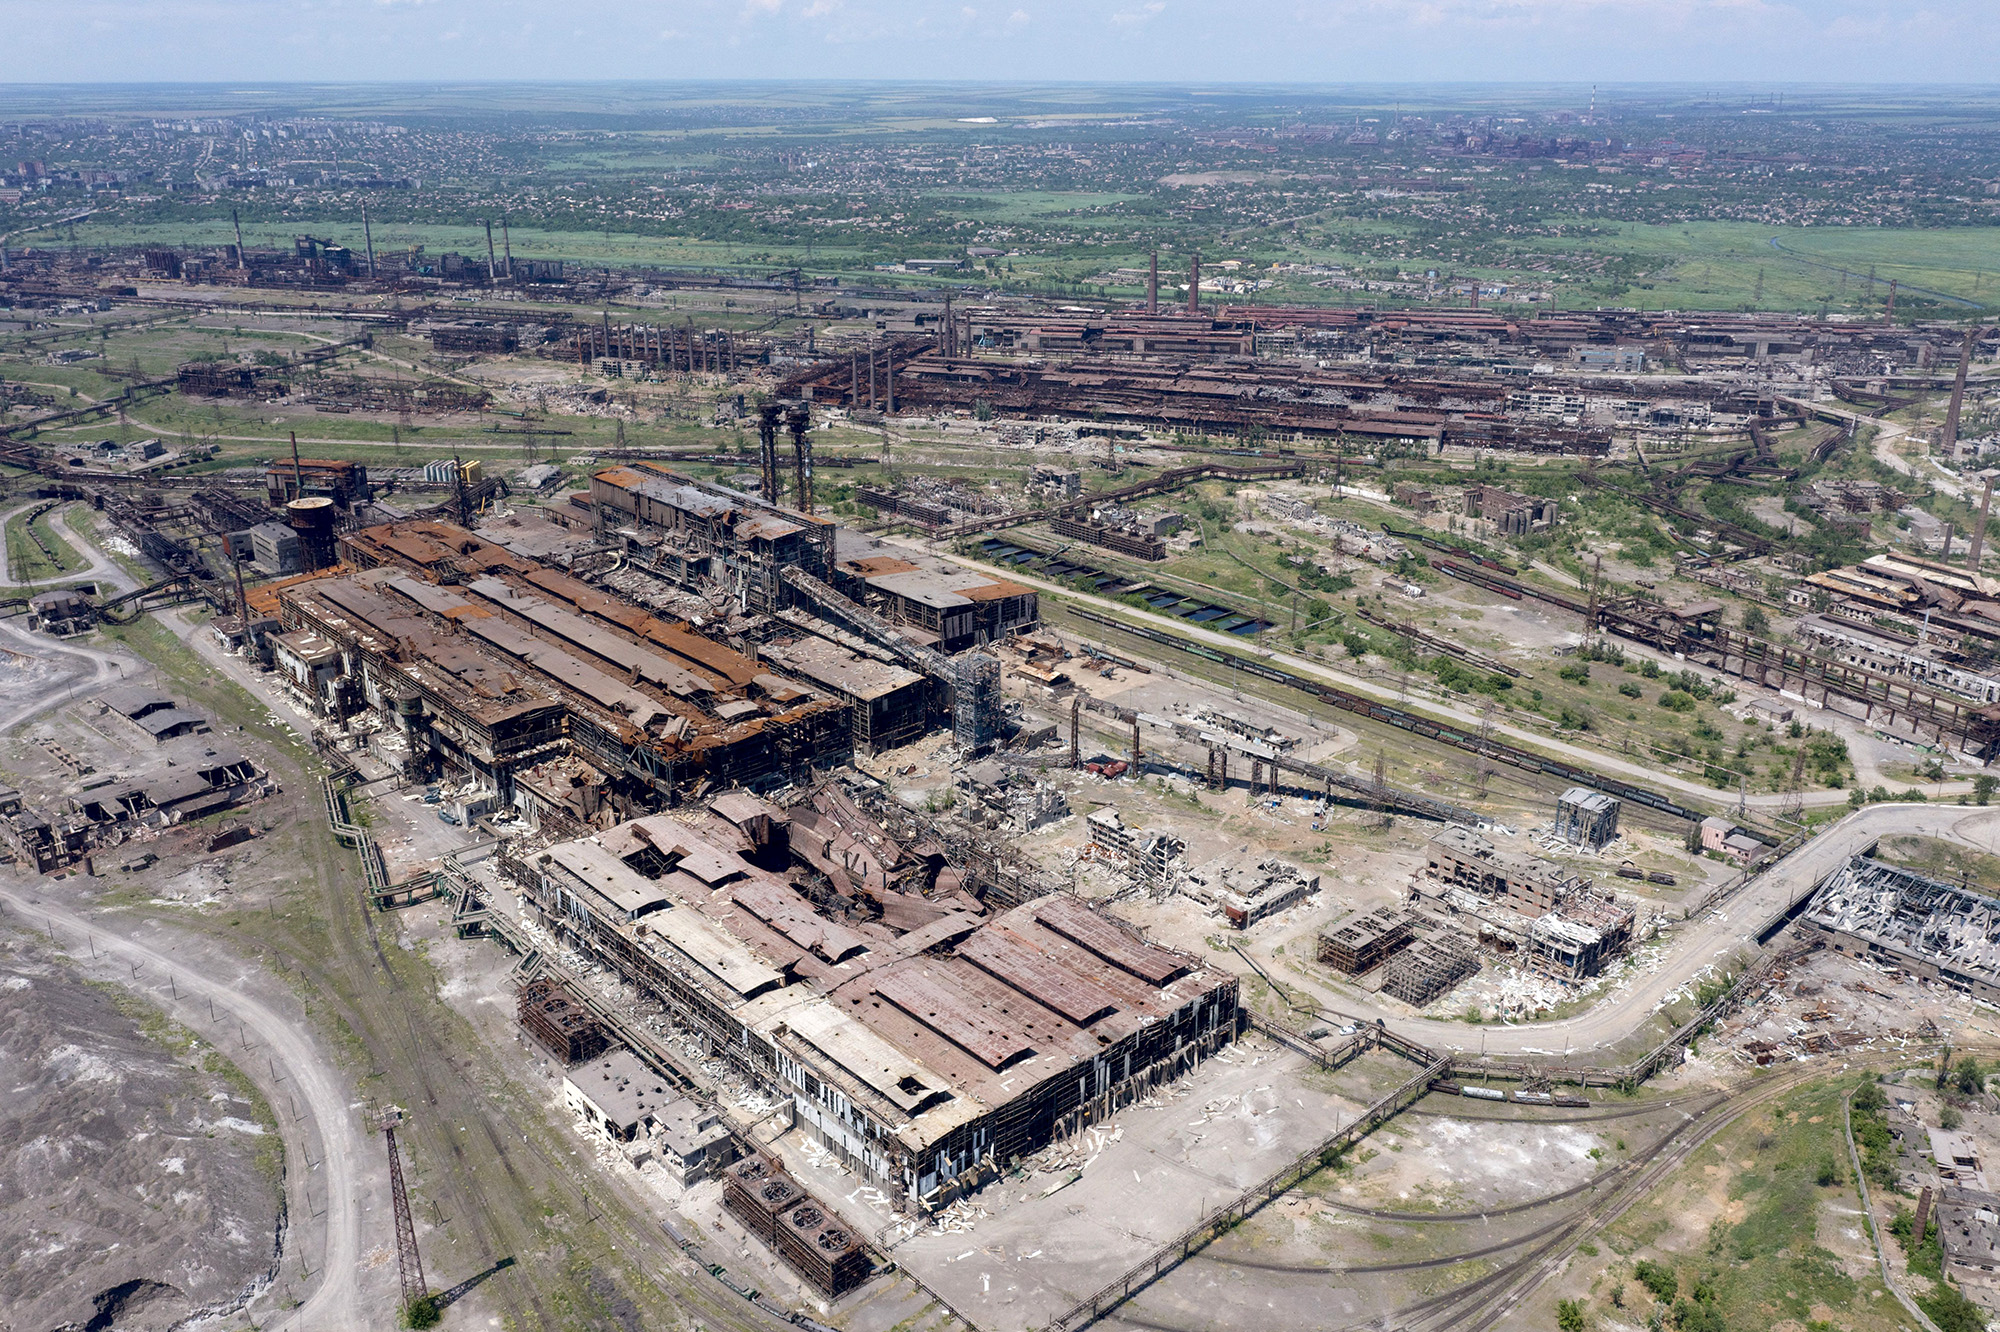 An aerial view shows ruins of the Azovstal steel plant in Mariupol, Ukraine, on June 13.